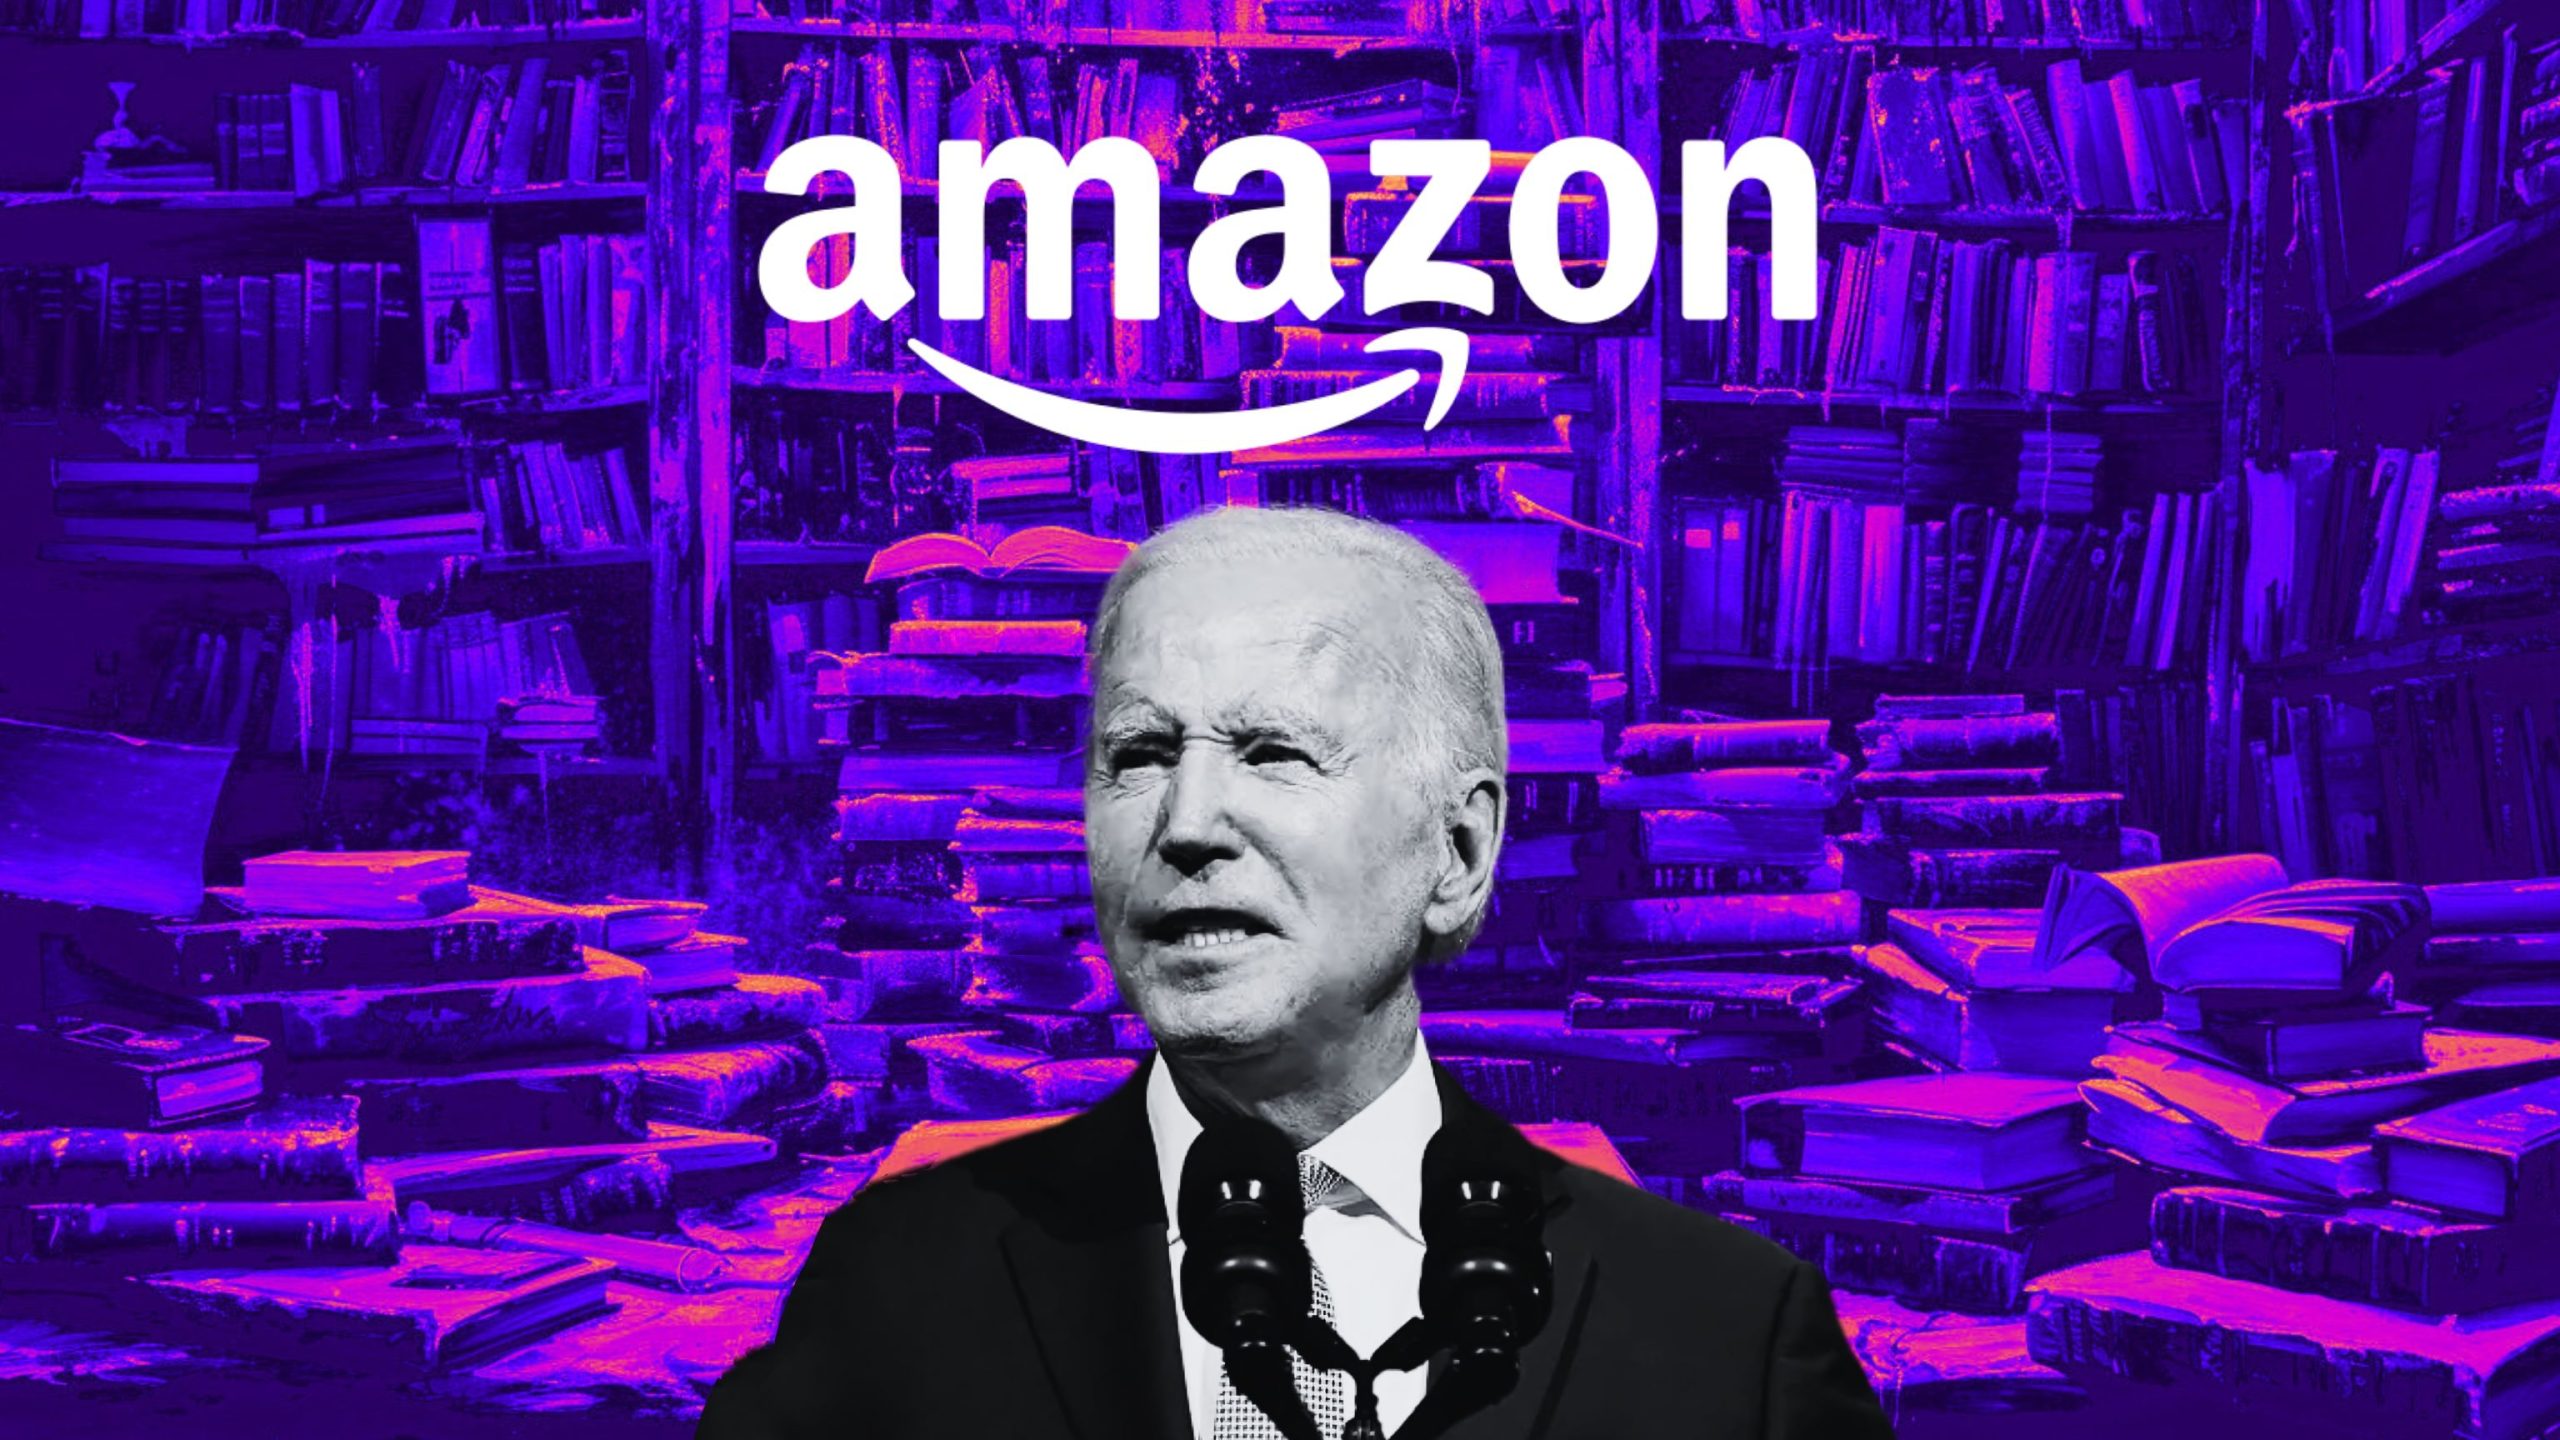 New Emails Show Amazon Caved to Biden Admin Pressure To Censor Covid Books That Expressed Dissenting Views